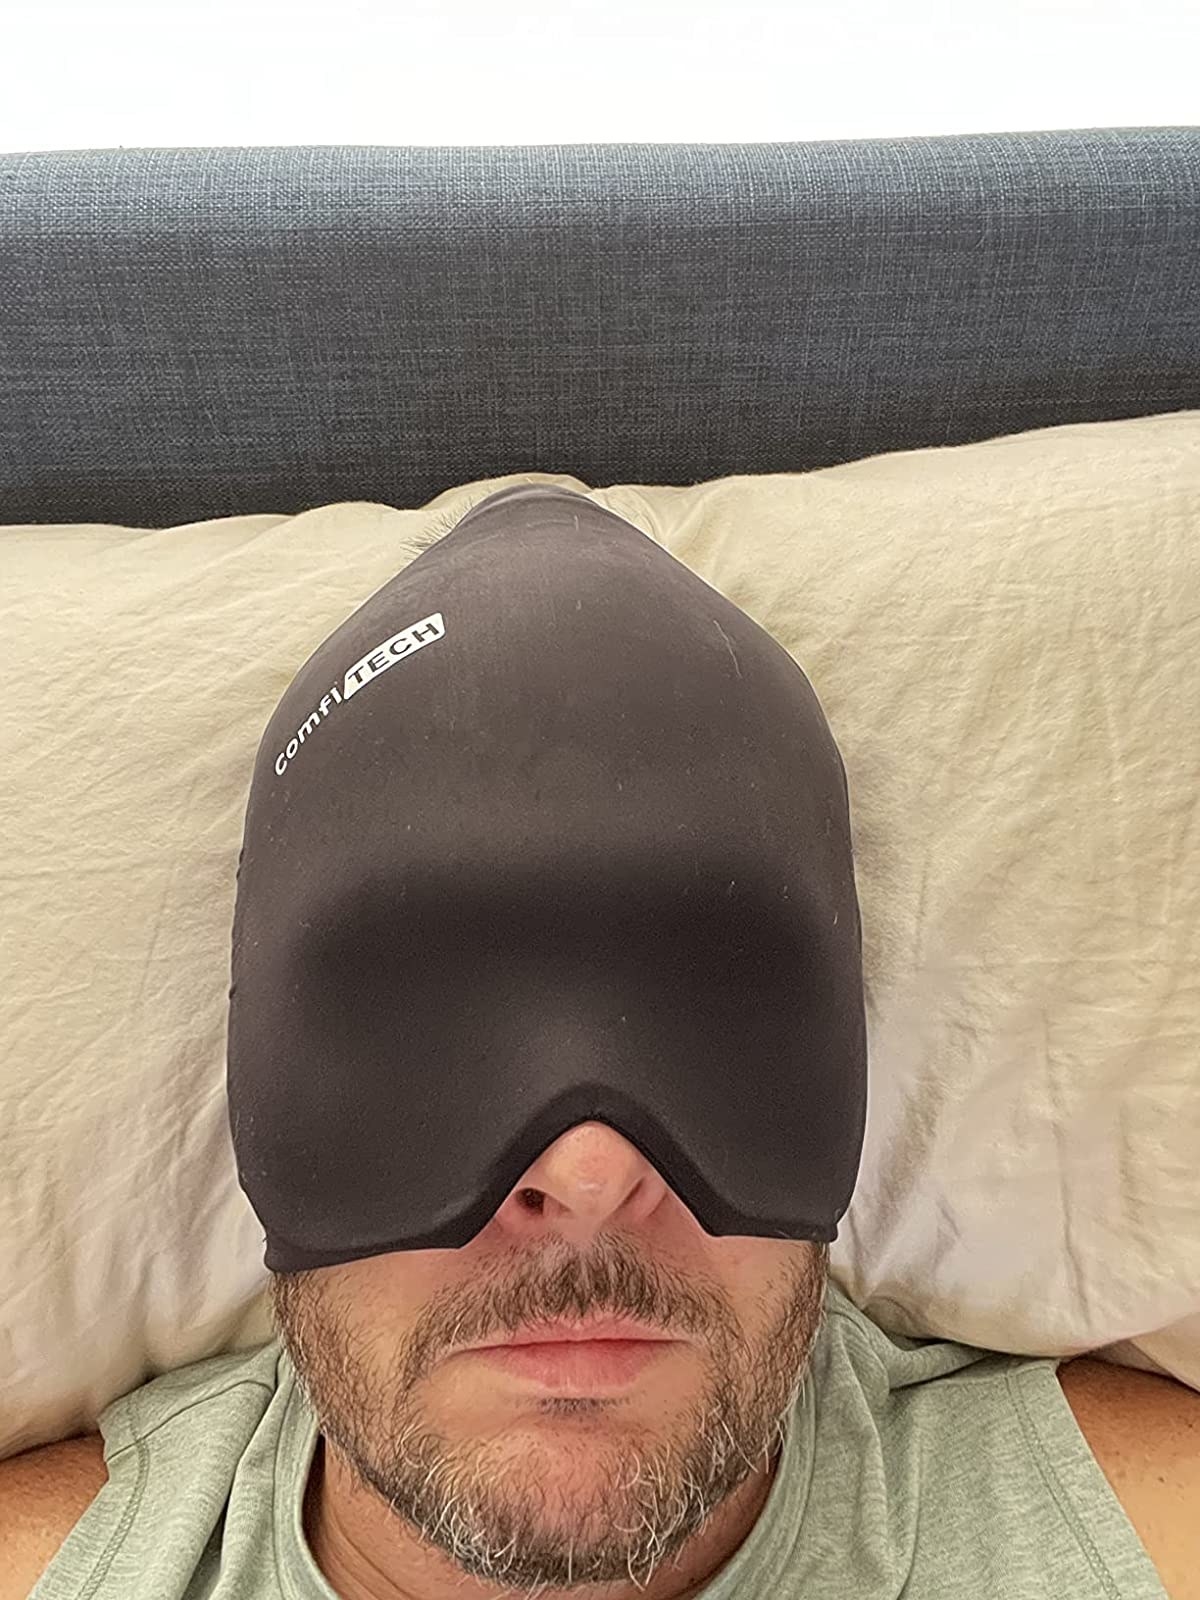 Reviewer laying down with the headache cap on covering down to their nose